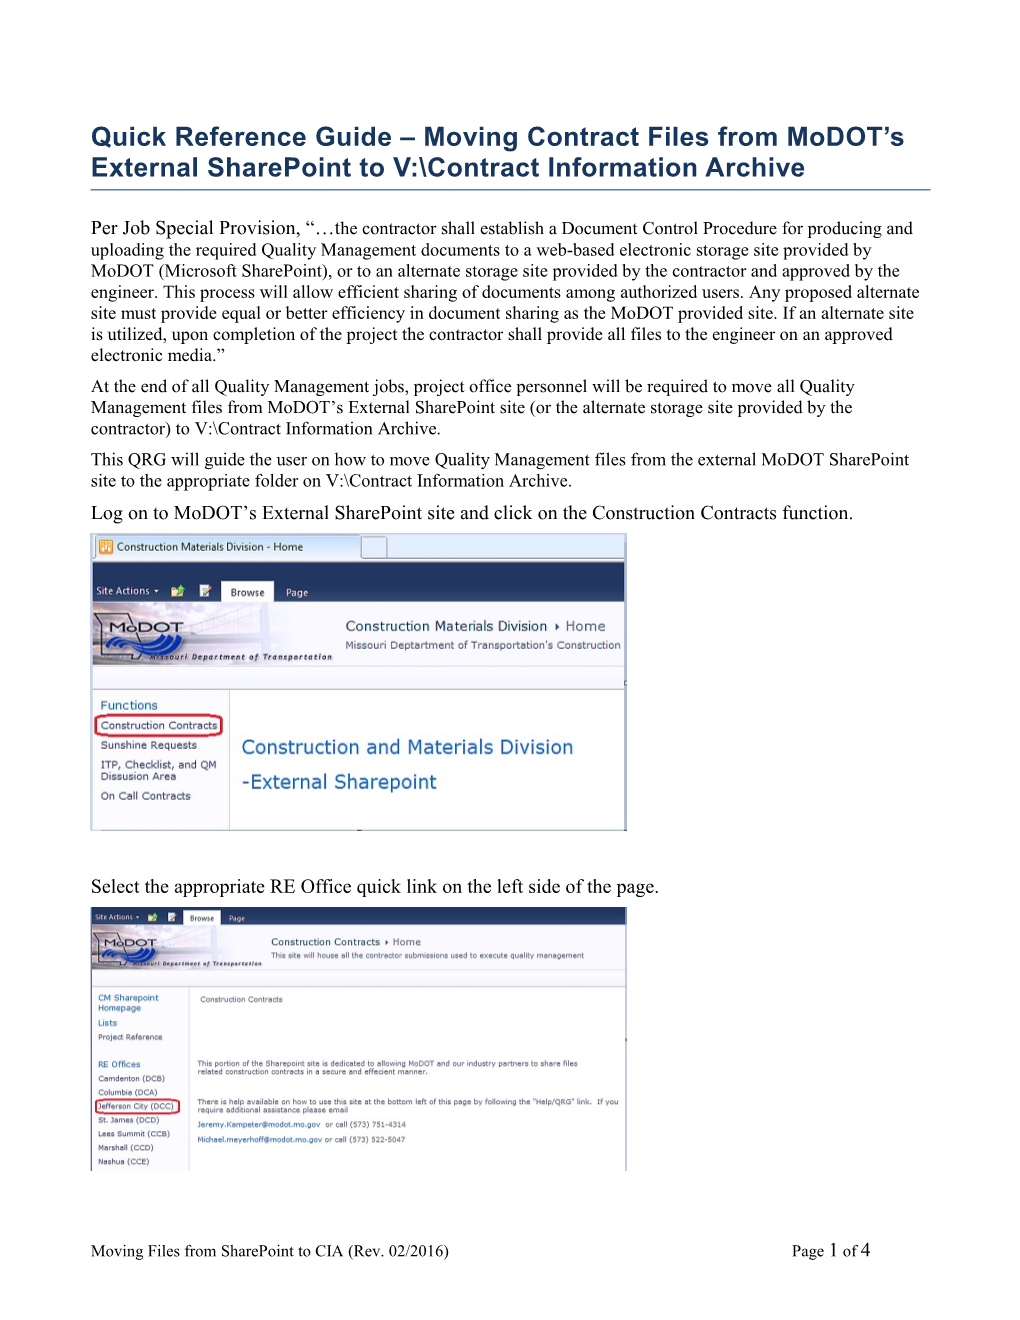 Quick Reference Guide Moving Contract Files from Modot S External Sharepoint to V: Contract